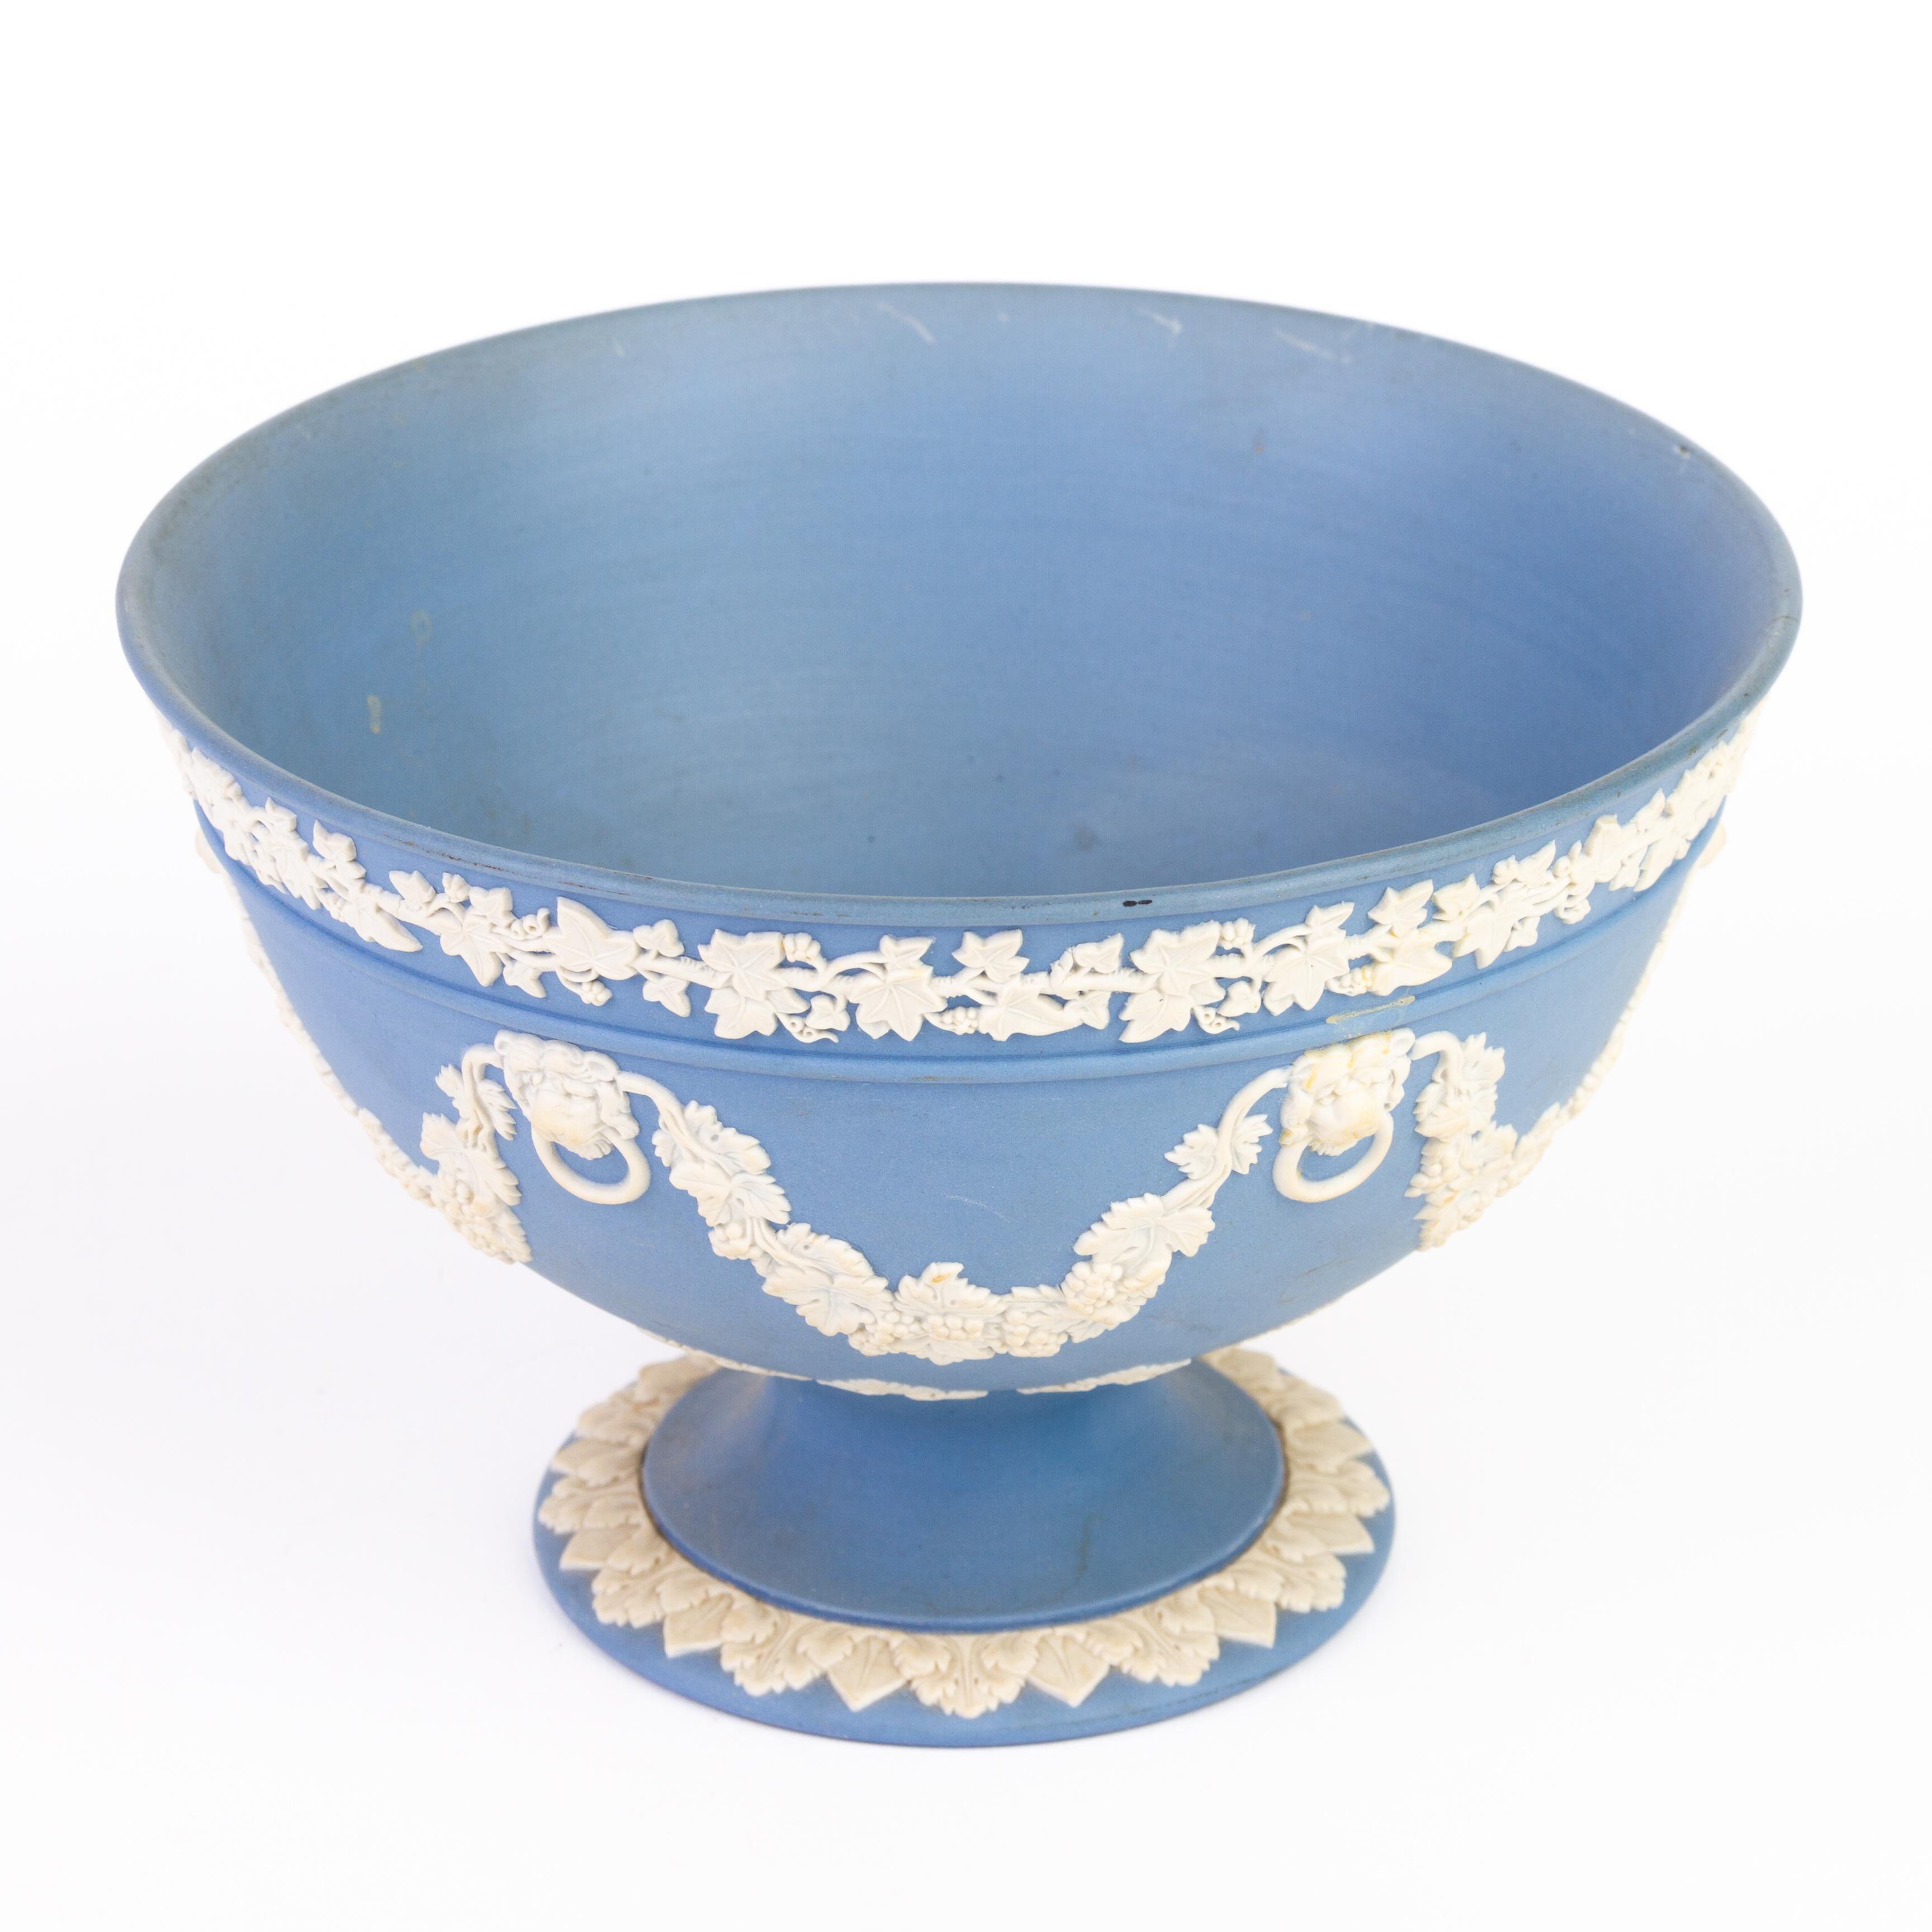 From a private collection.
Free international shipping.
Wedgwood Blue Jasperware Neoclassical Comport Centre Bowl 